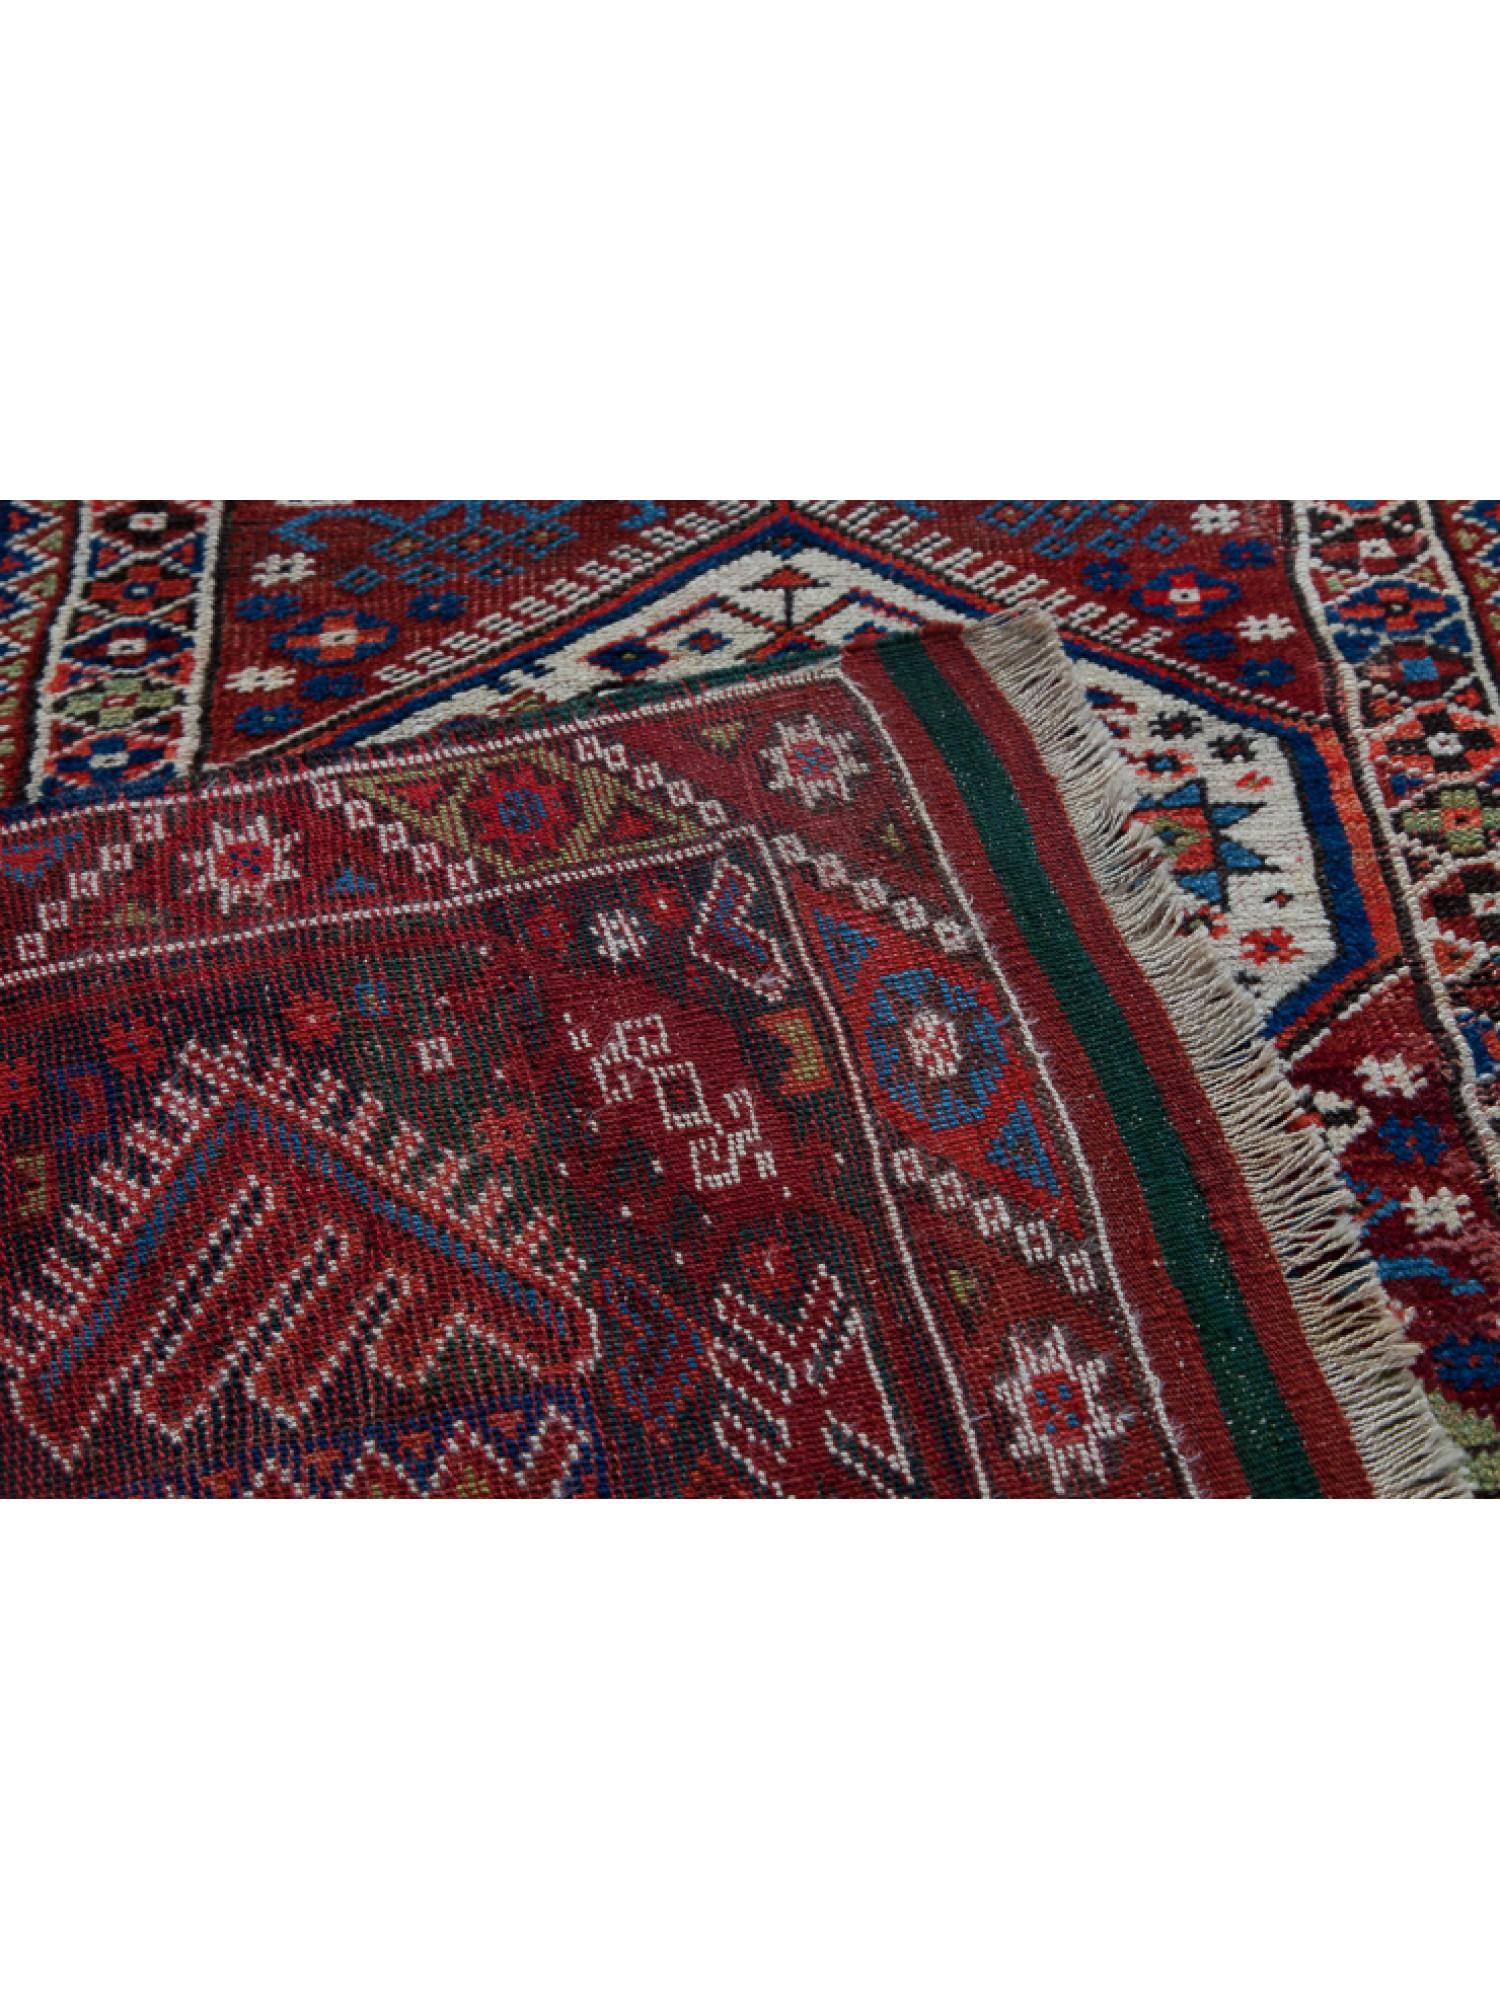 Antique Antalya Dosemealti Rug Southern Turkish Carpet In Good Condition For Sale In Tokyo, JP